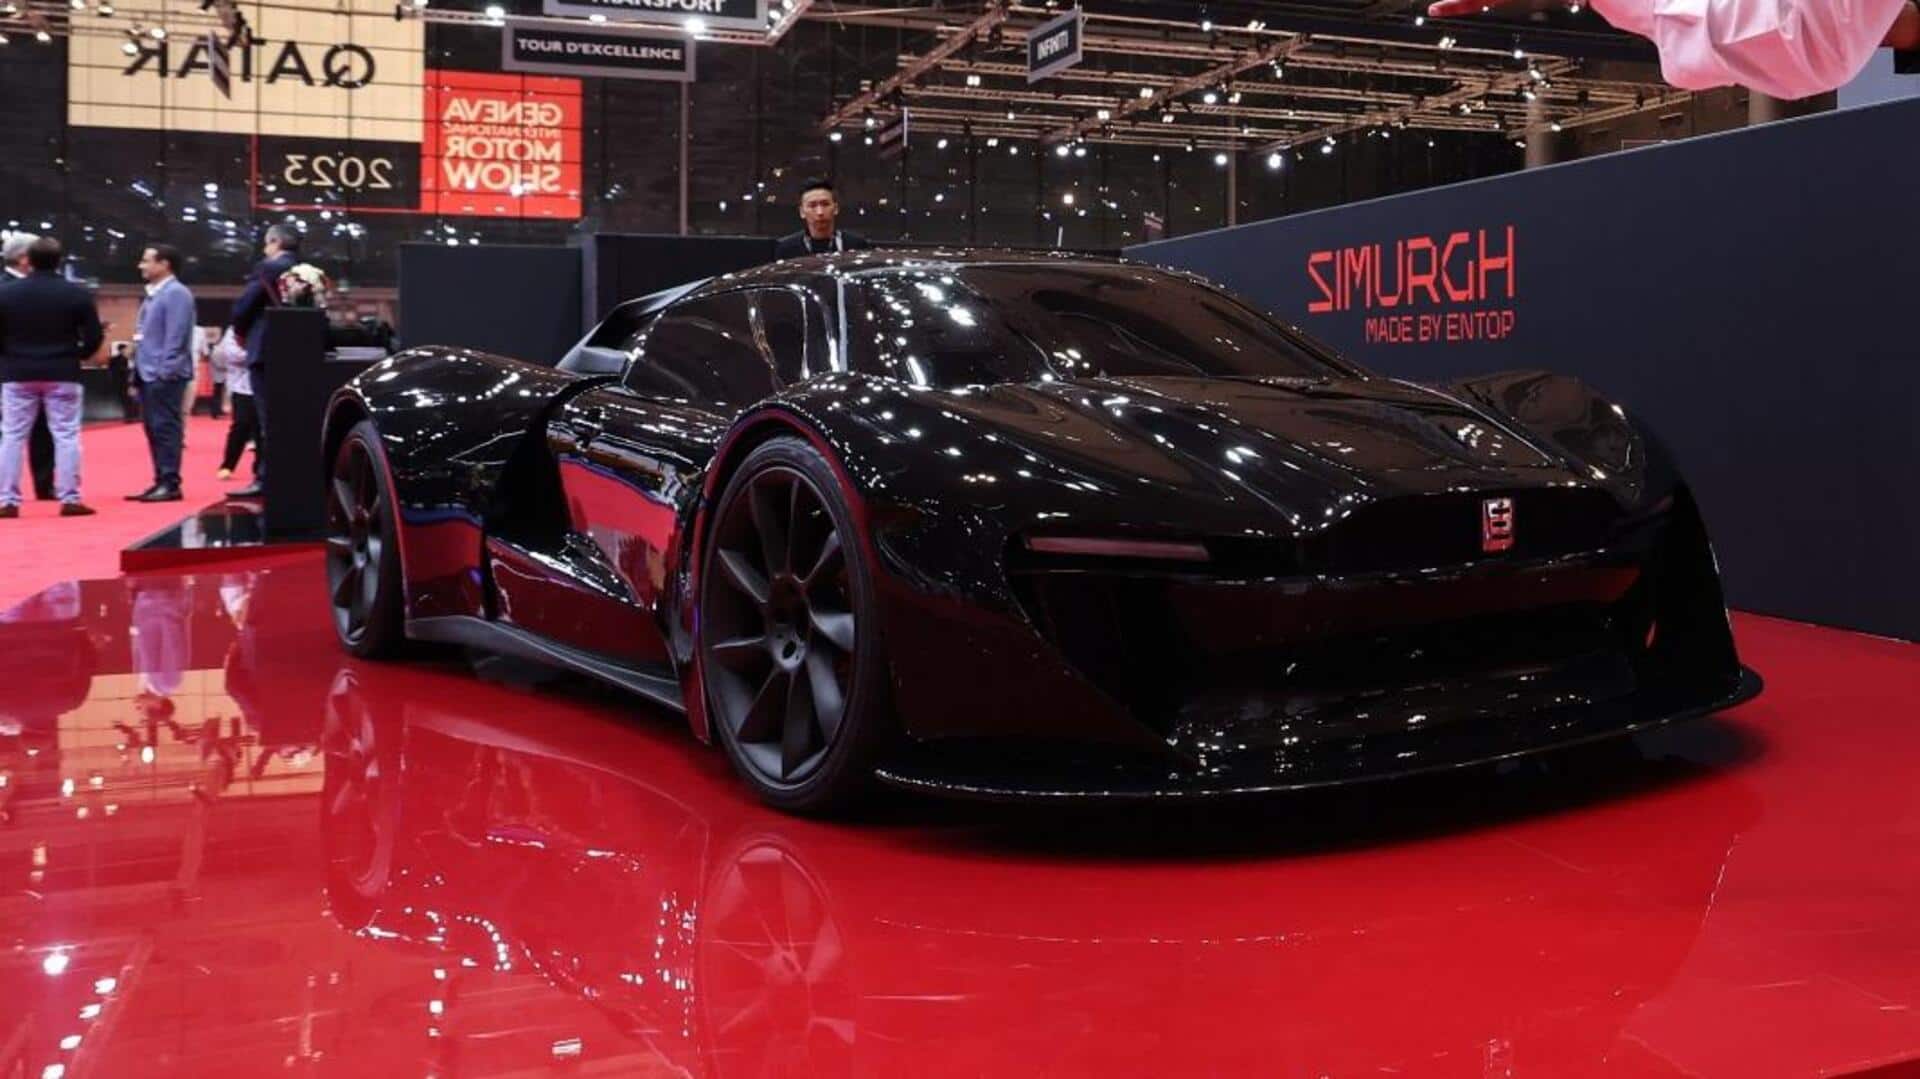 Afghanistan's Simurgh supercar showcased at Geneva Motor Show: Check features